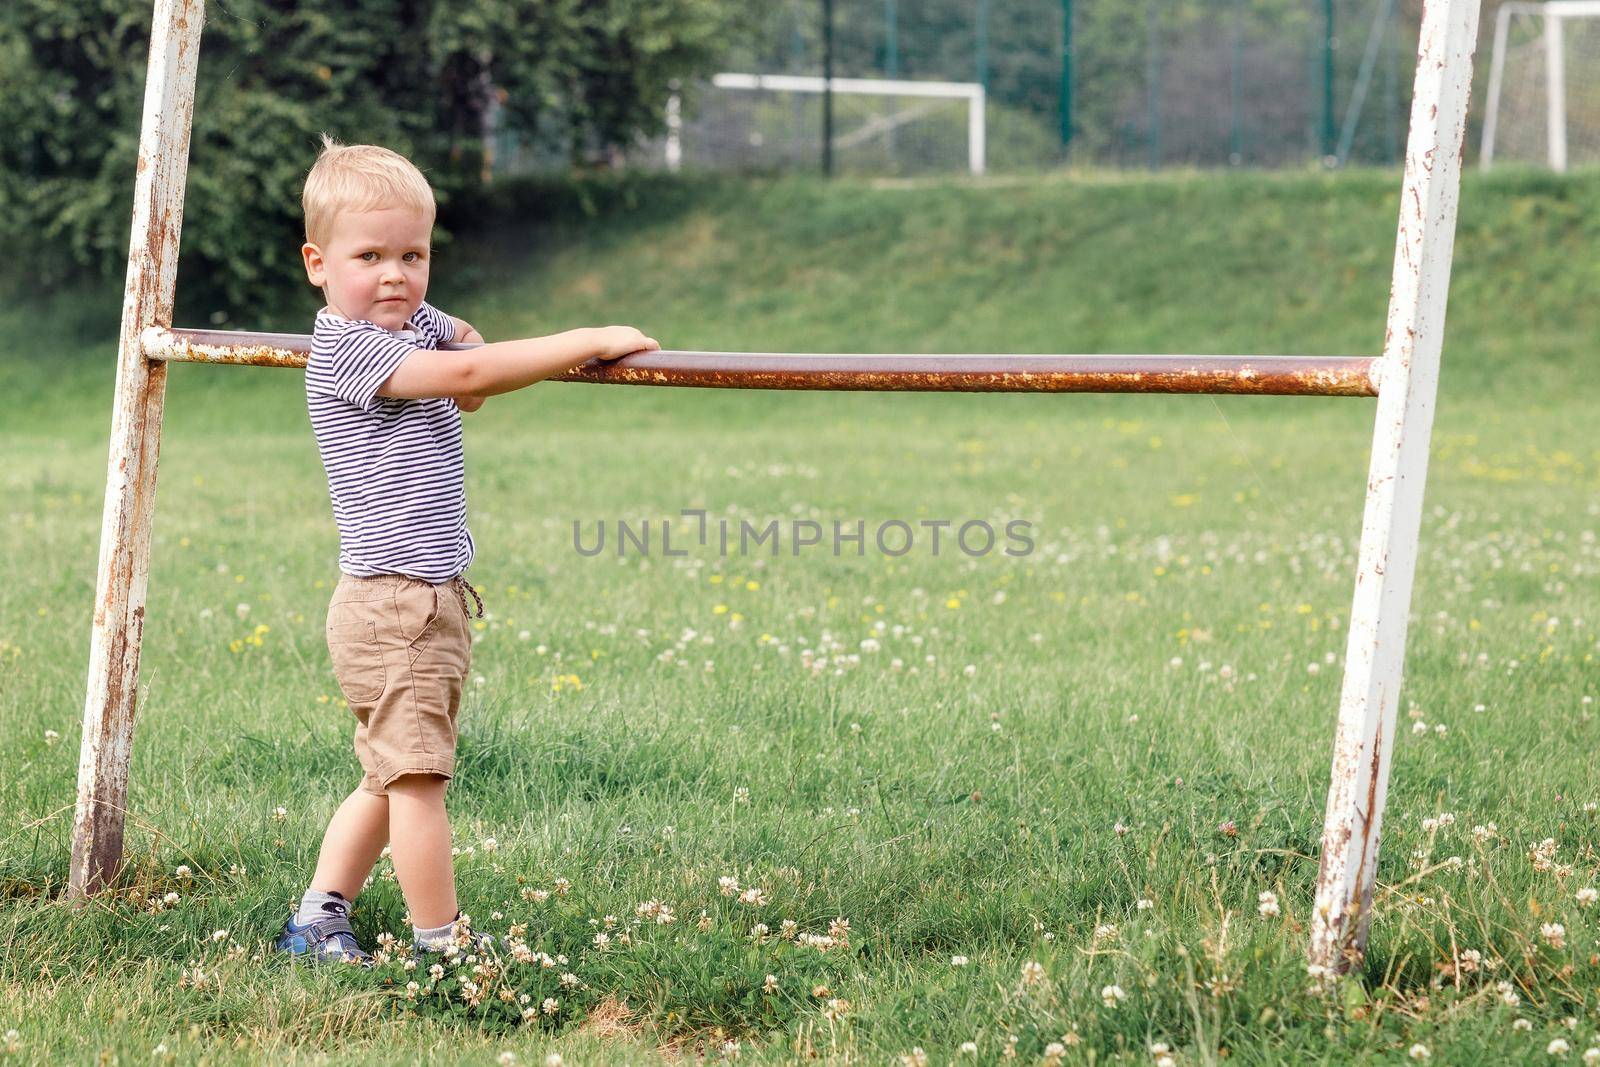 Cute kid posing and looking at camera. Holding old iron railing in a greenfield background.